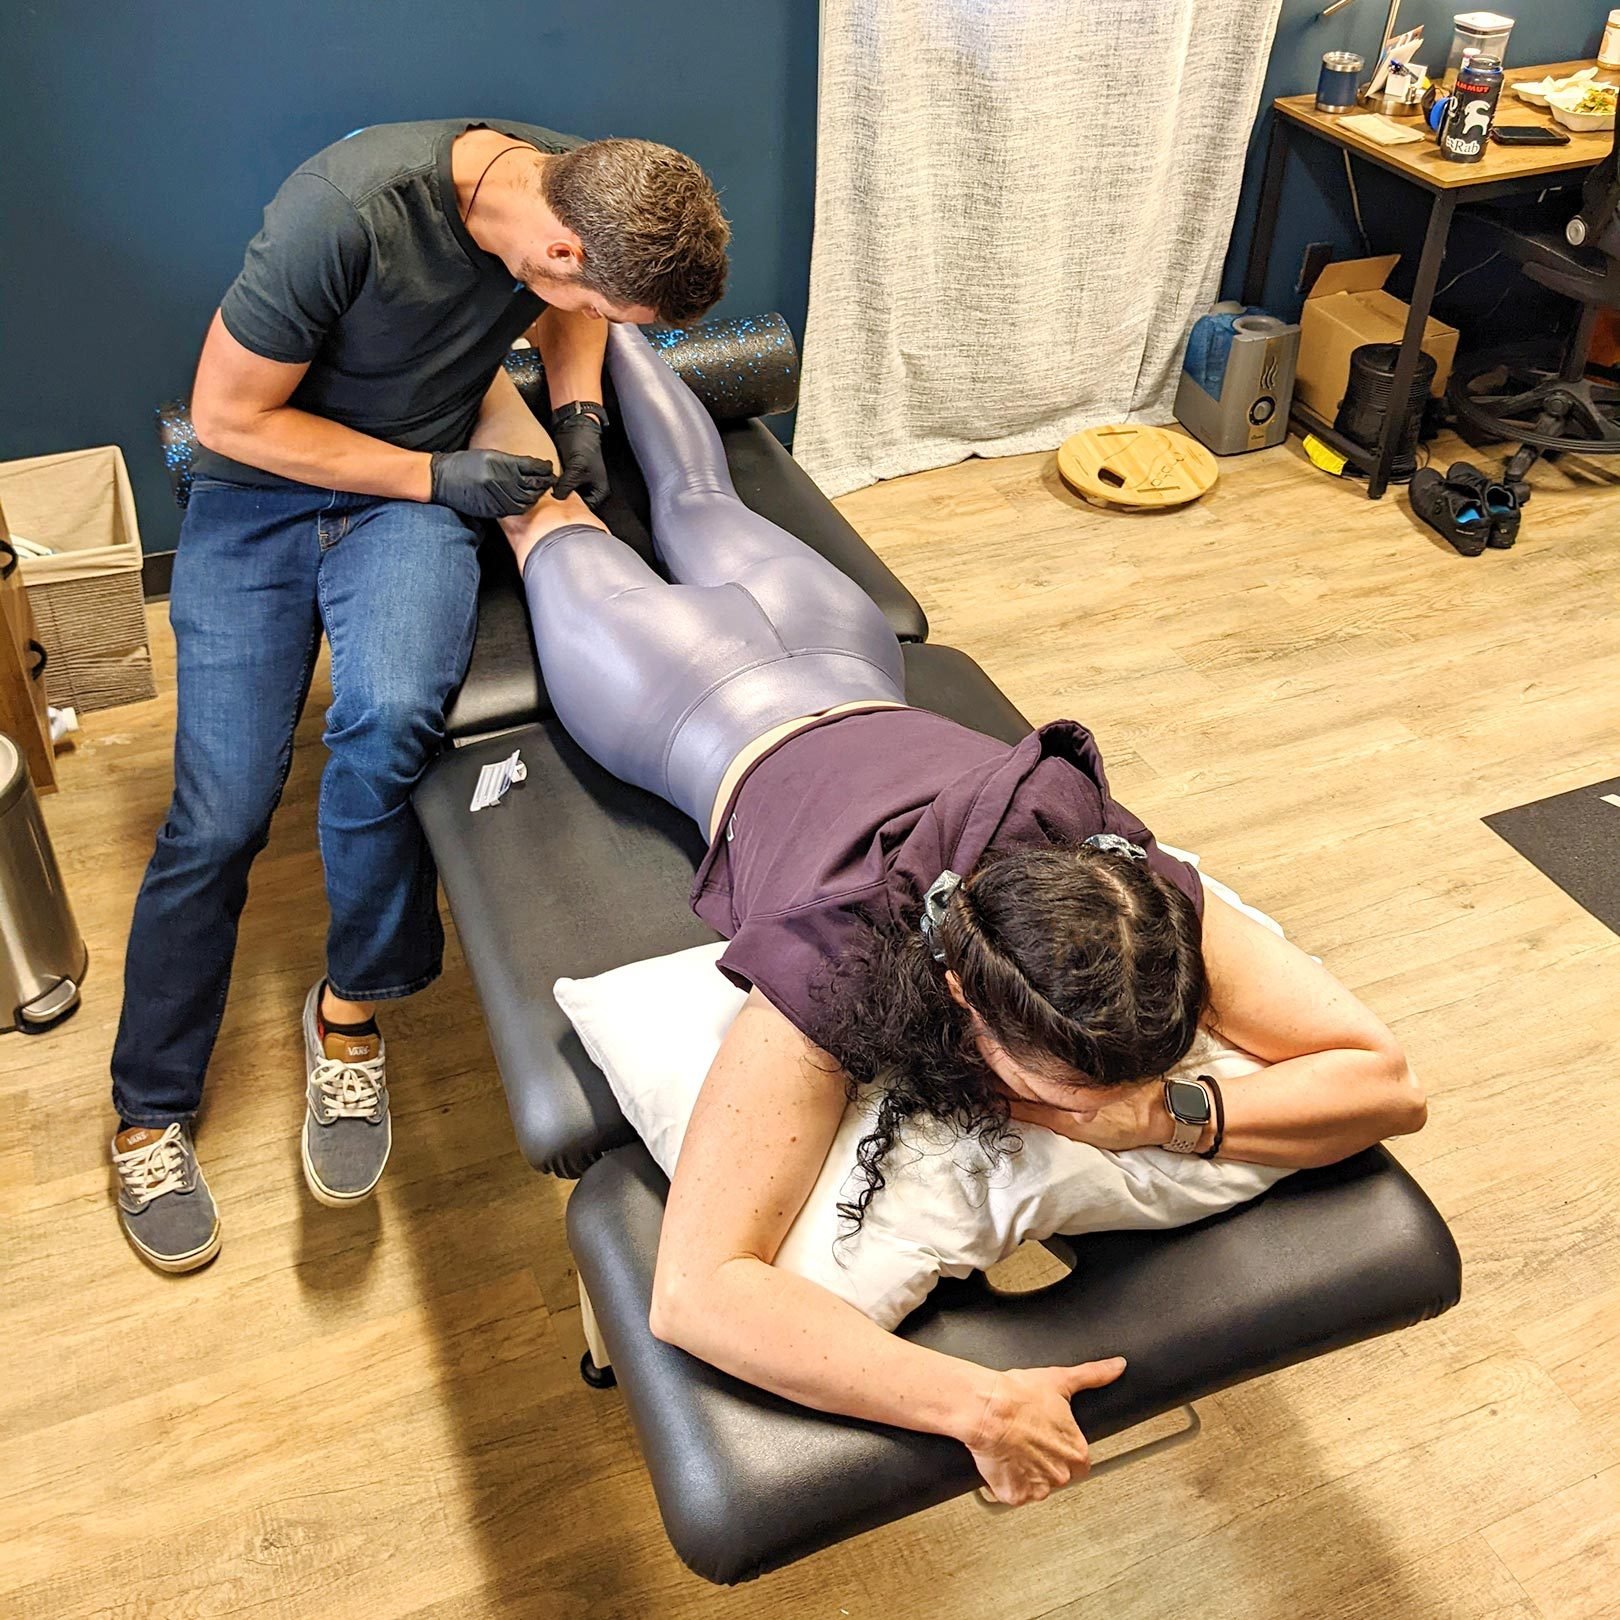 Dry Needling for Pain Relief: ‘I Tried It’